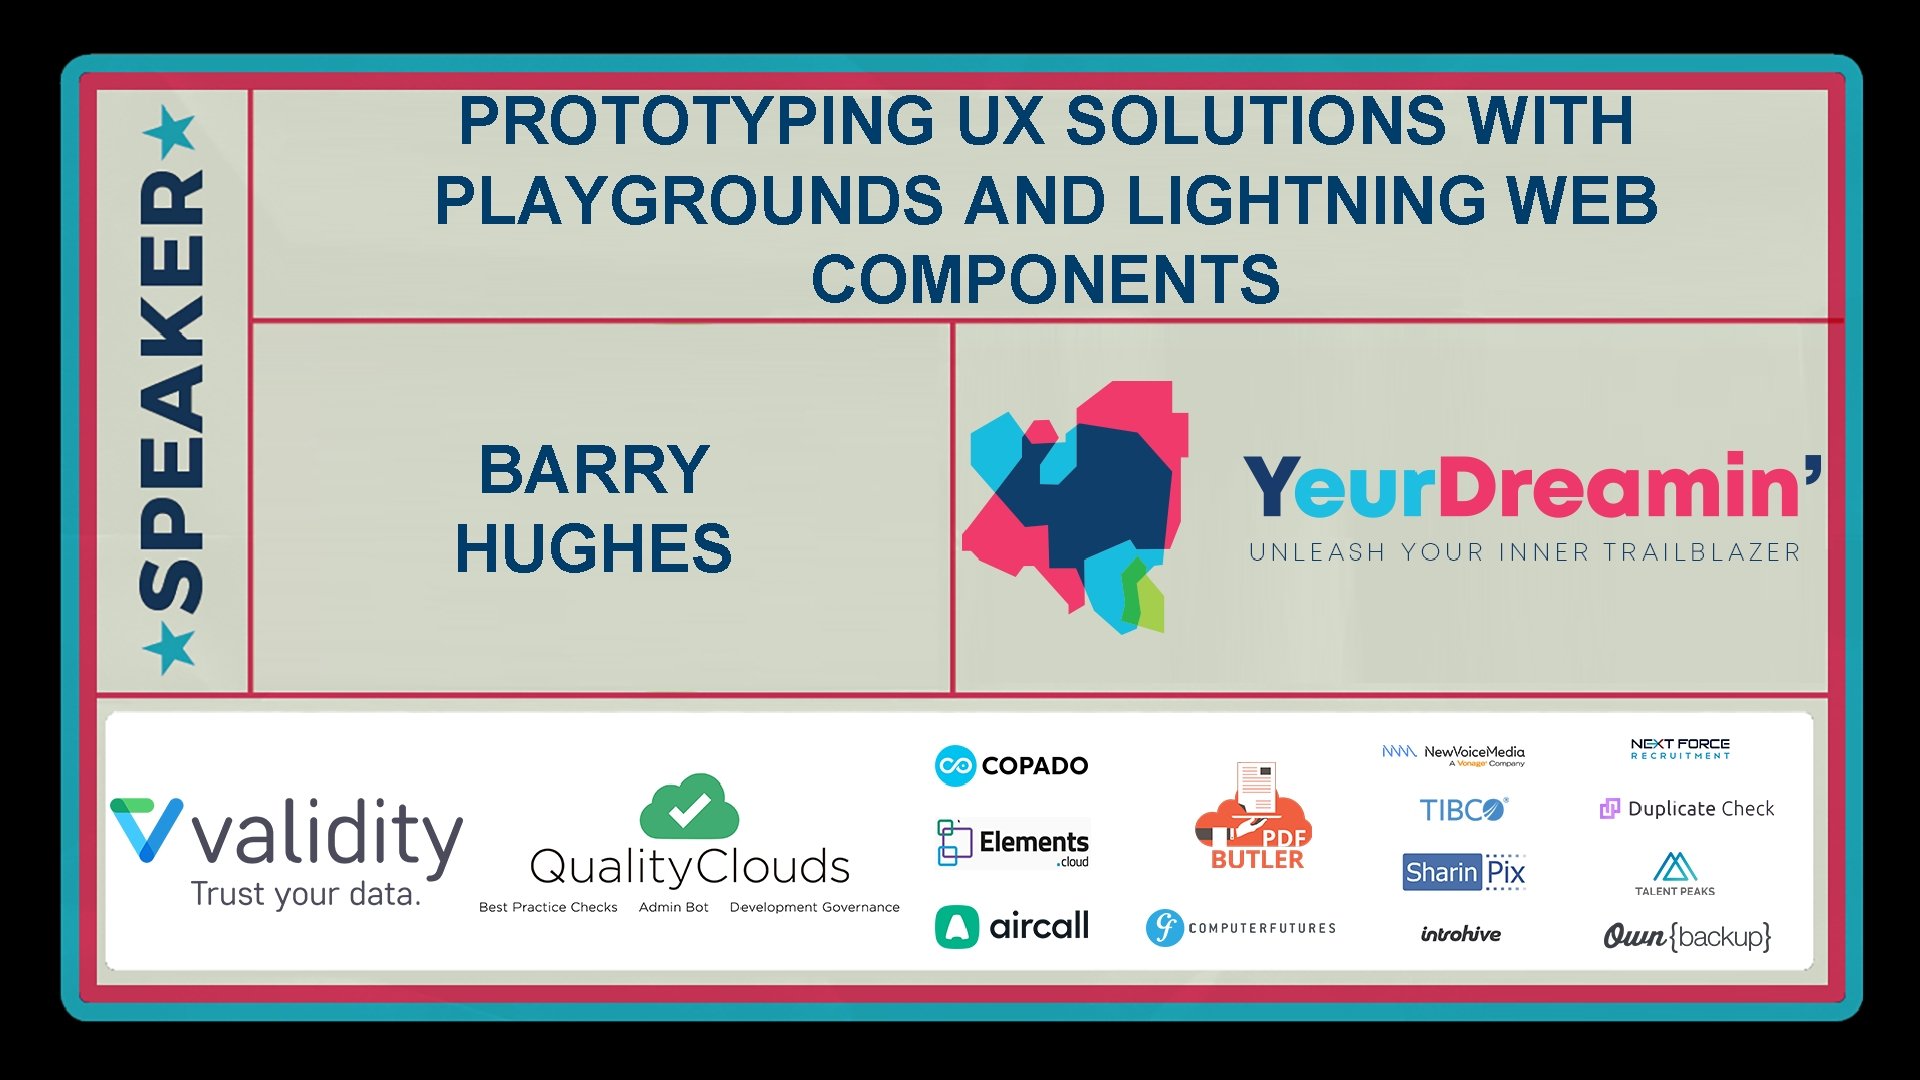 PROTOTYPING UX SOLUTIONS WITH PLAYGROUNDS AND LIGHTNING WEB COMPONENTS BARRY HUGHES 